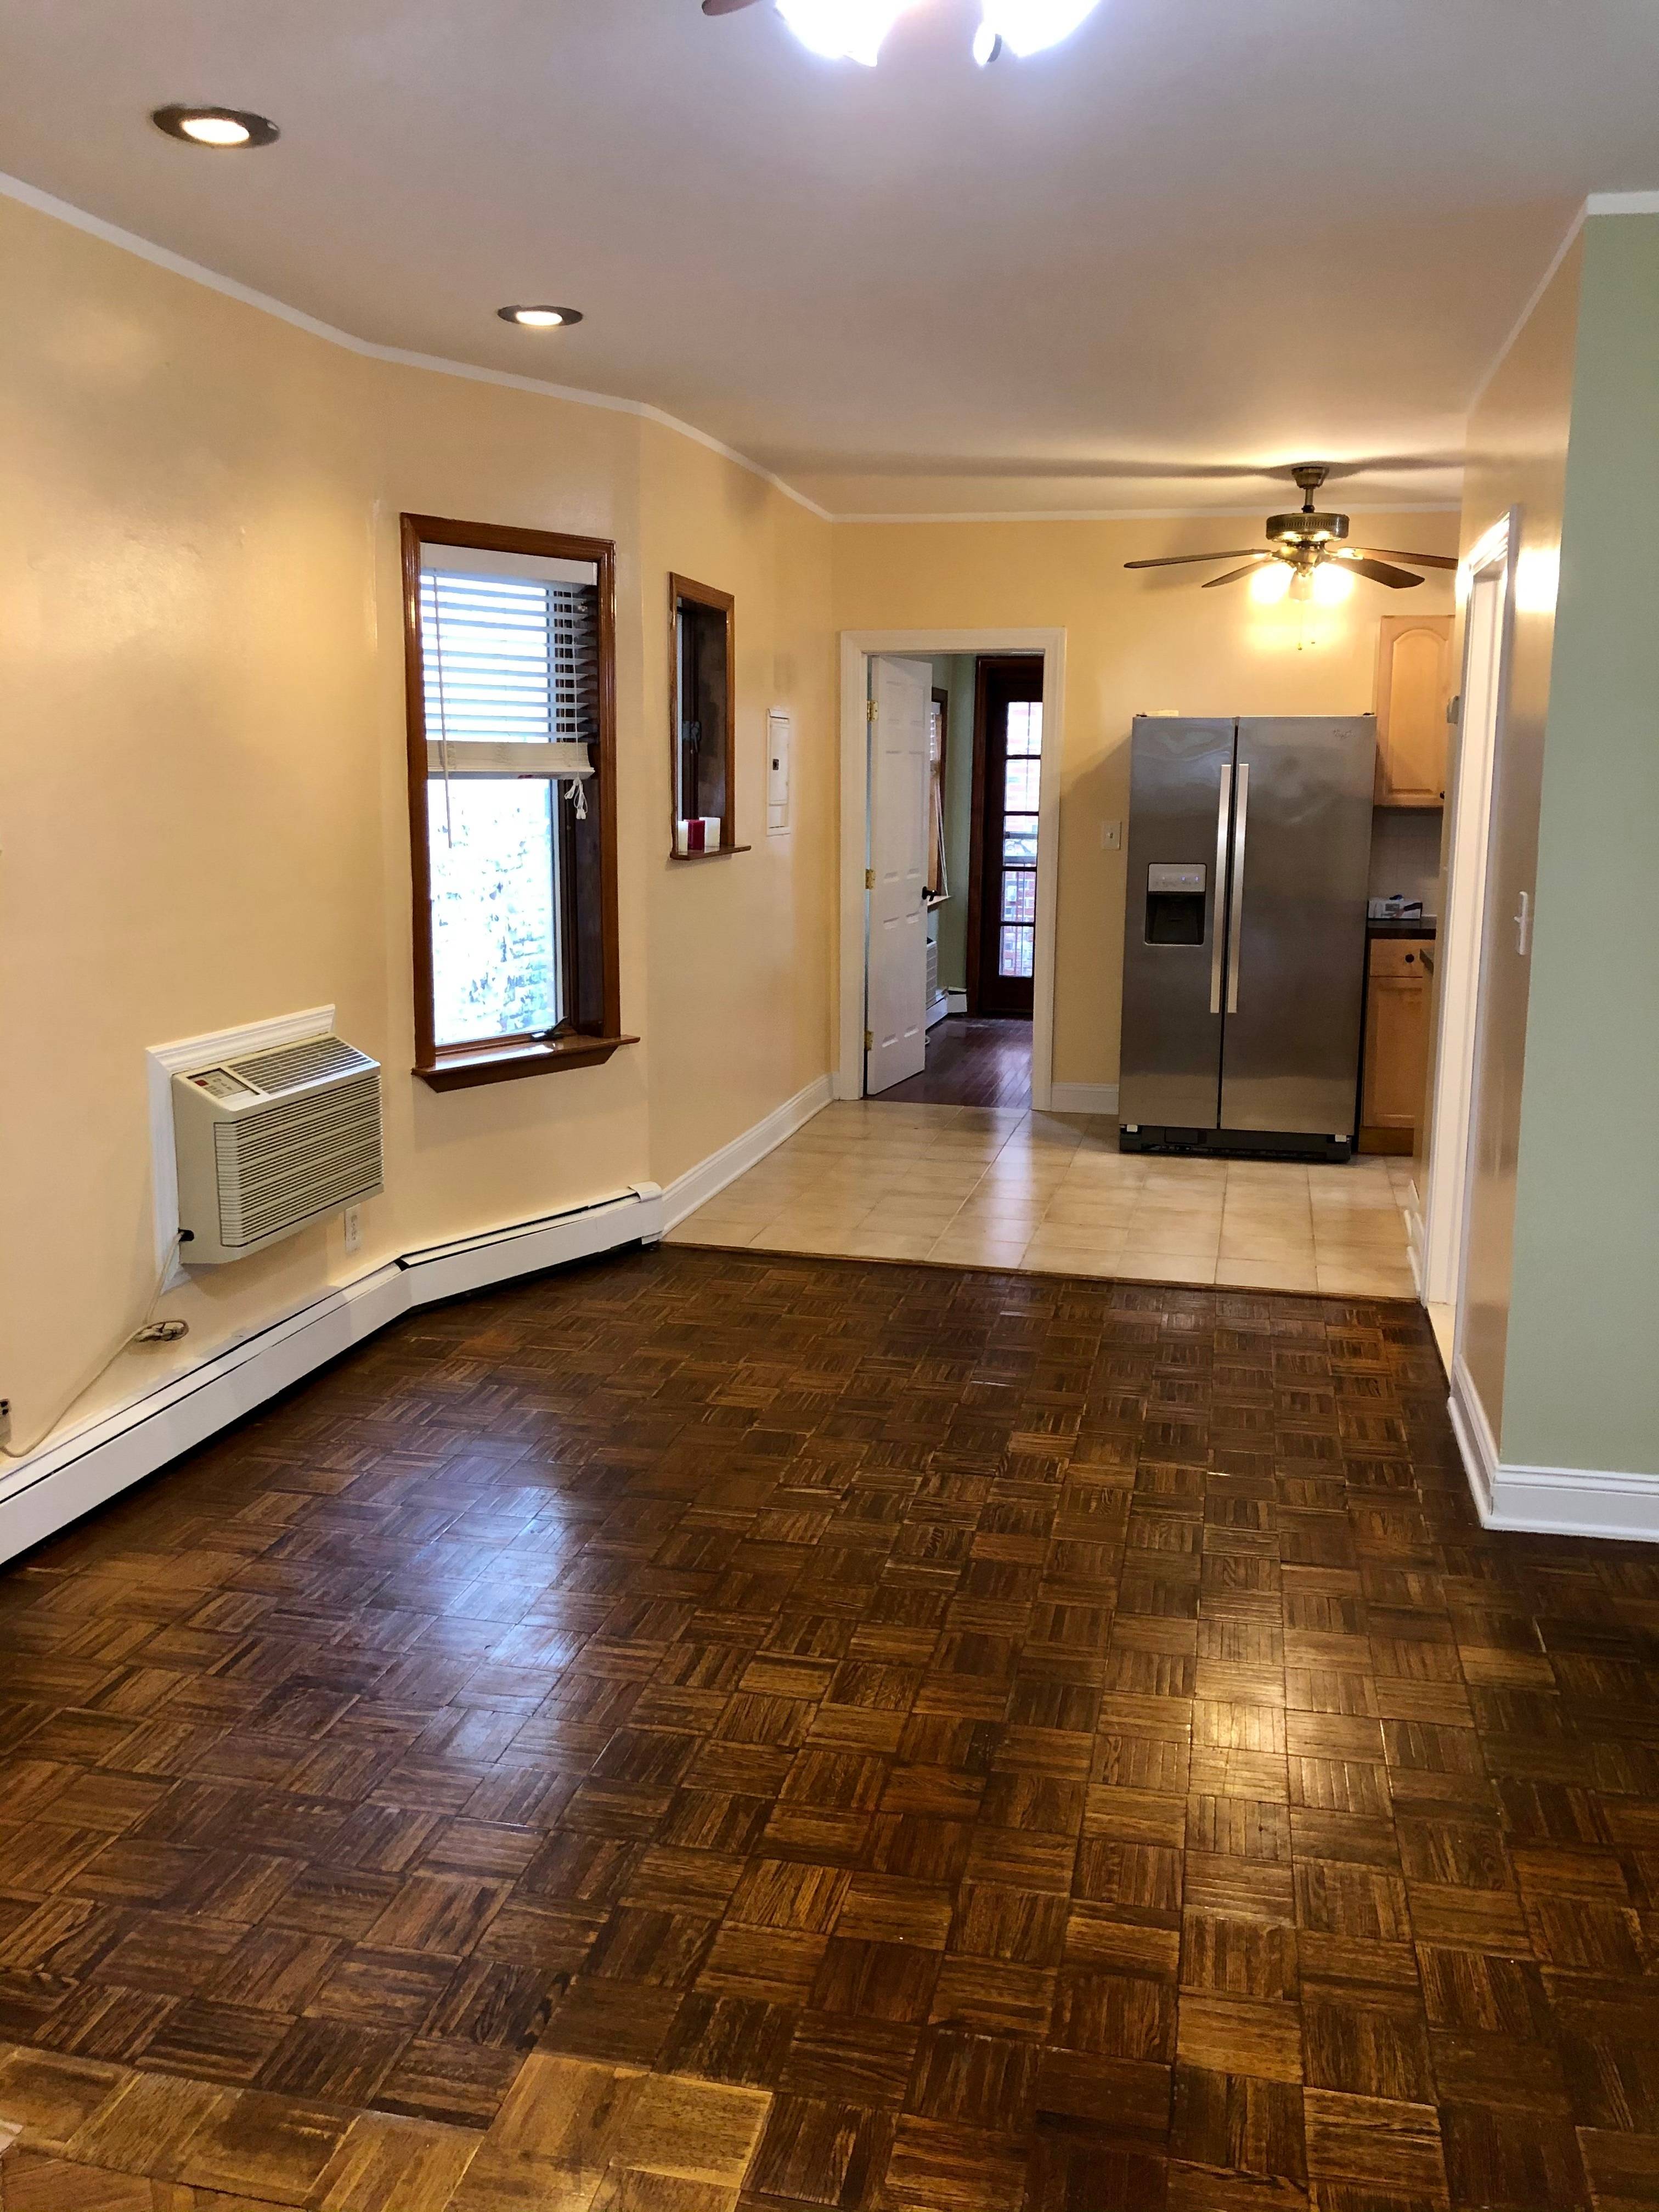 Large 2 Bedroom Apartment in the Heart of Maspeth